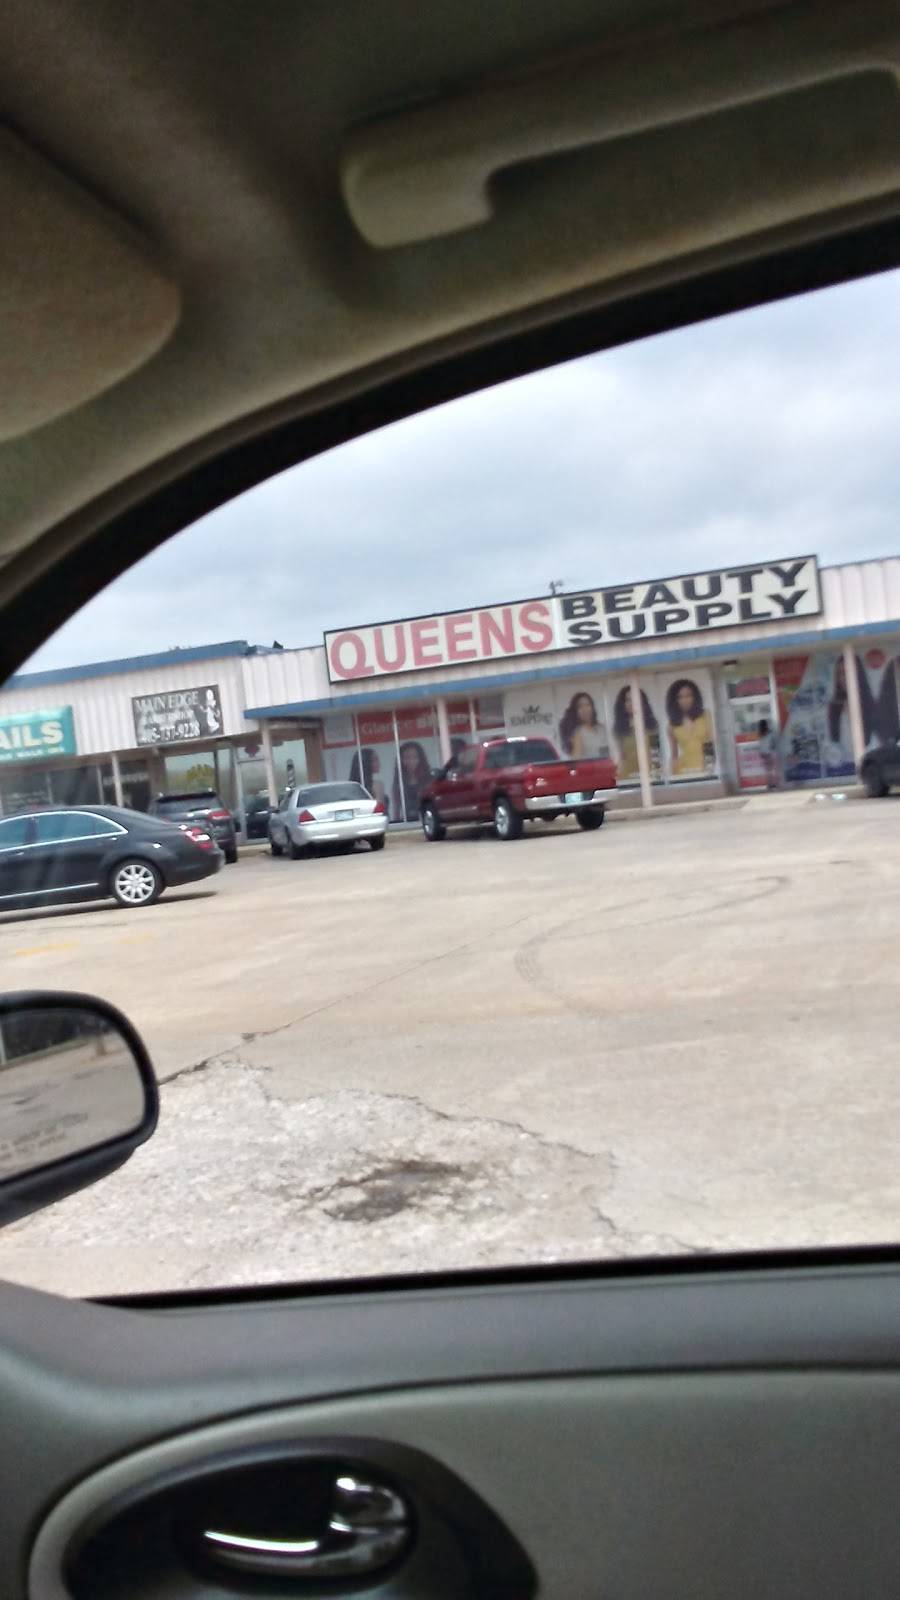 Queens Beauty Supply | 1108 N Midwest Blvd, Midwest City, OK 73110 | Phone: (405) 741-1010